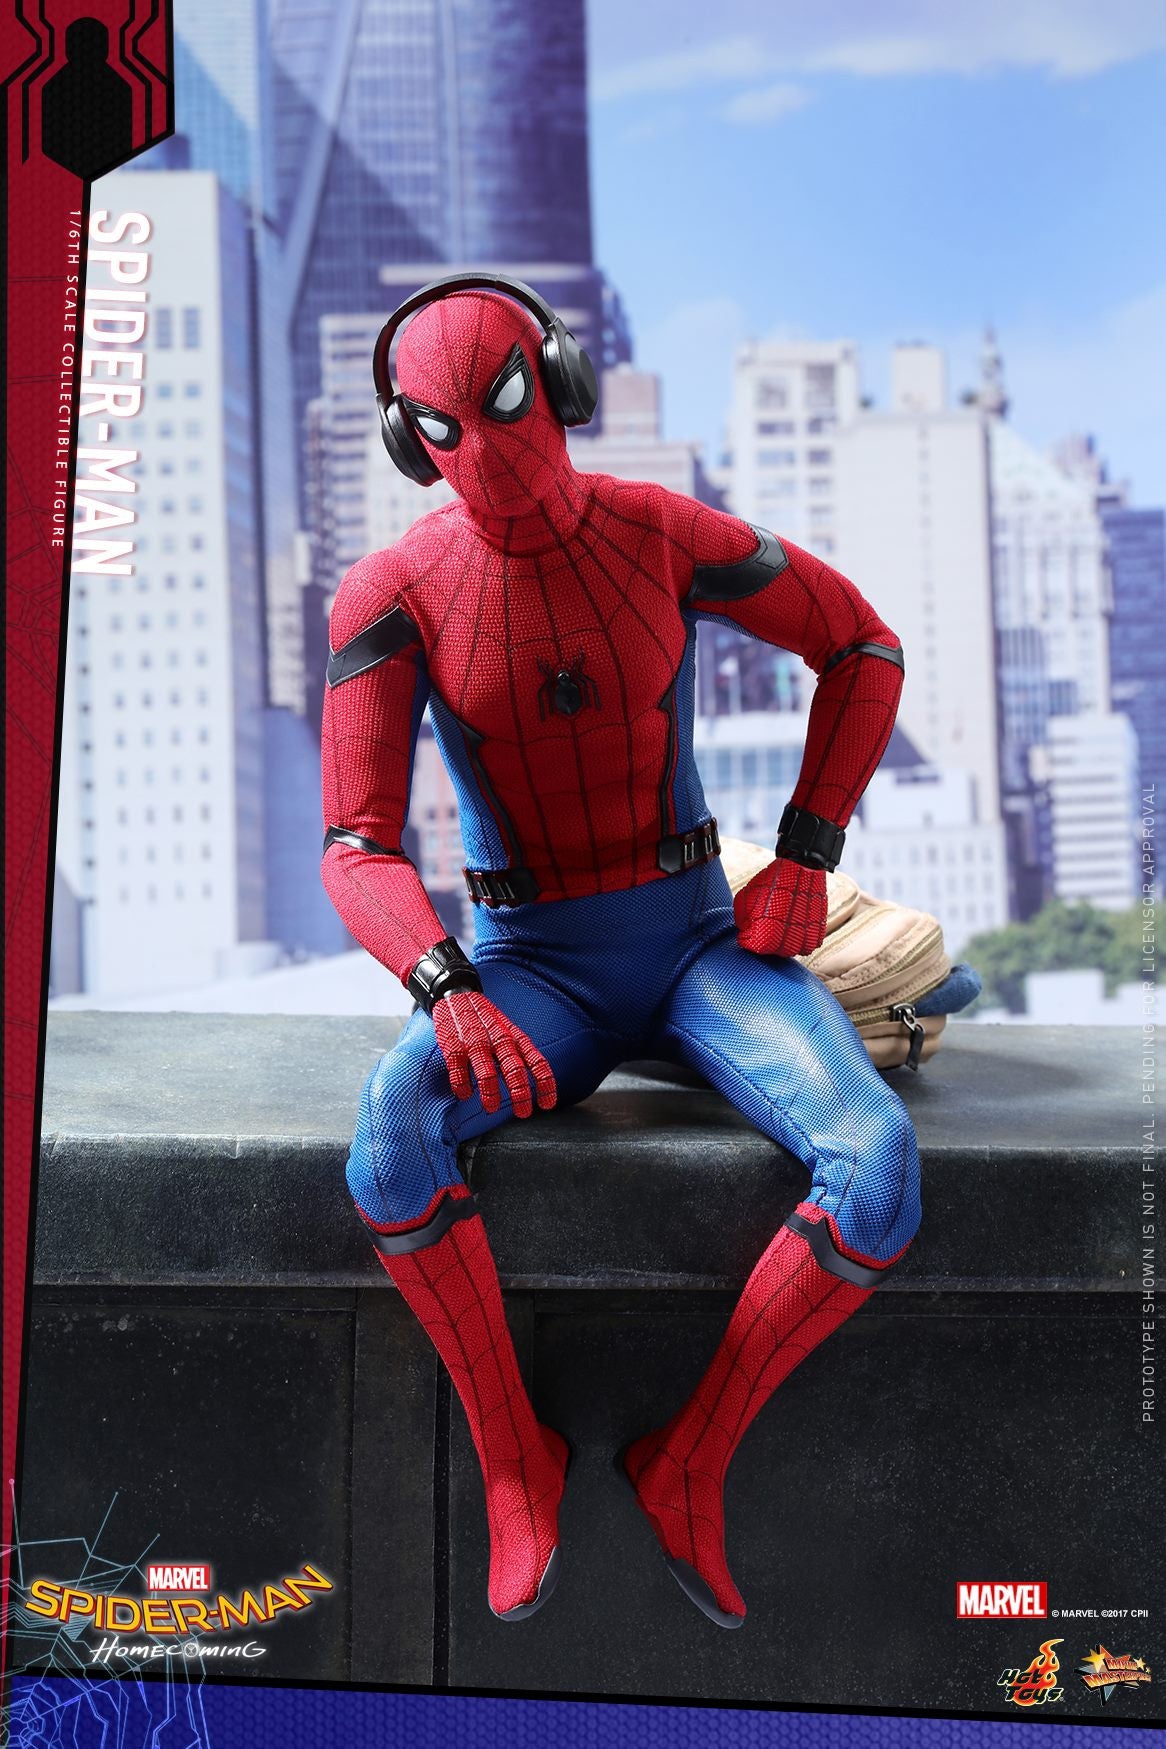 Hot Toys - MMS425 - Spider-Man: Homecoming - Spider-Man - Marvelous Toys